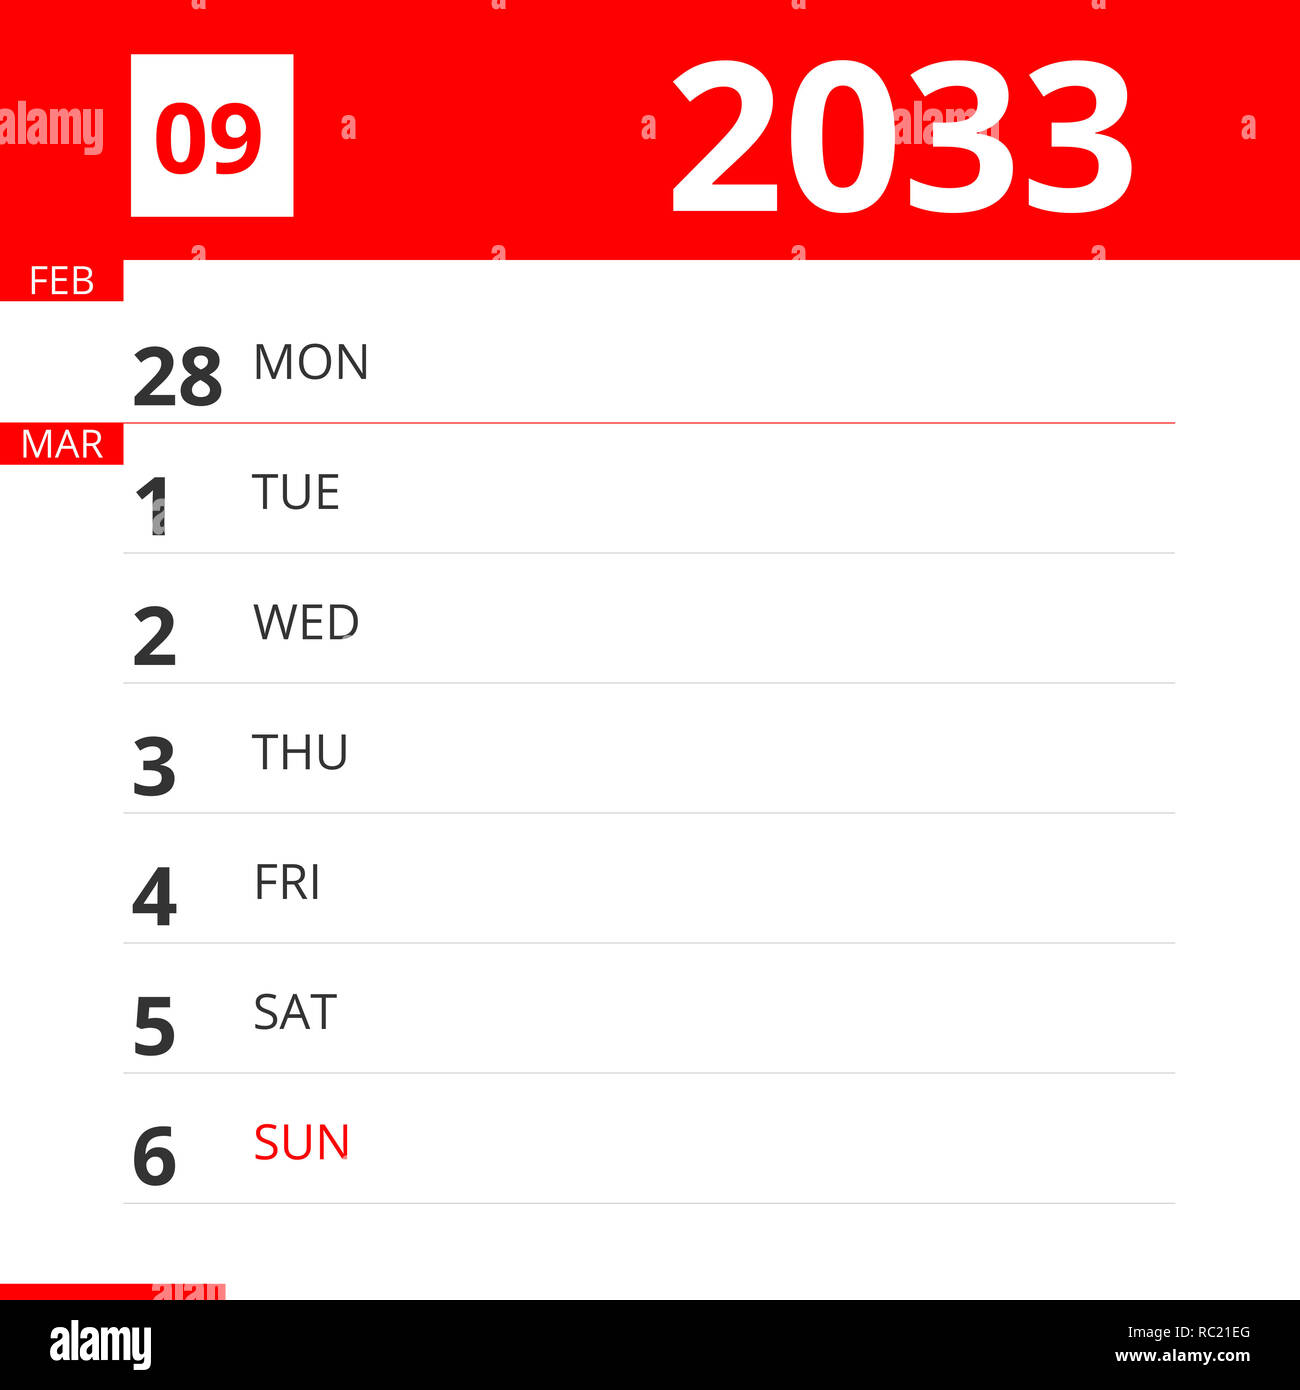 Calendar planner for Week 09 in 2033, ends March 6, 2033 . Stock Photo